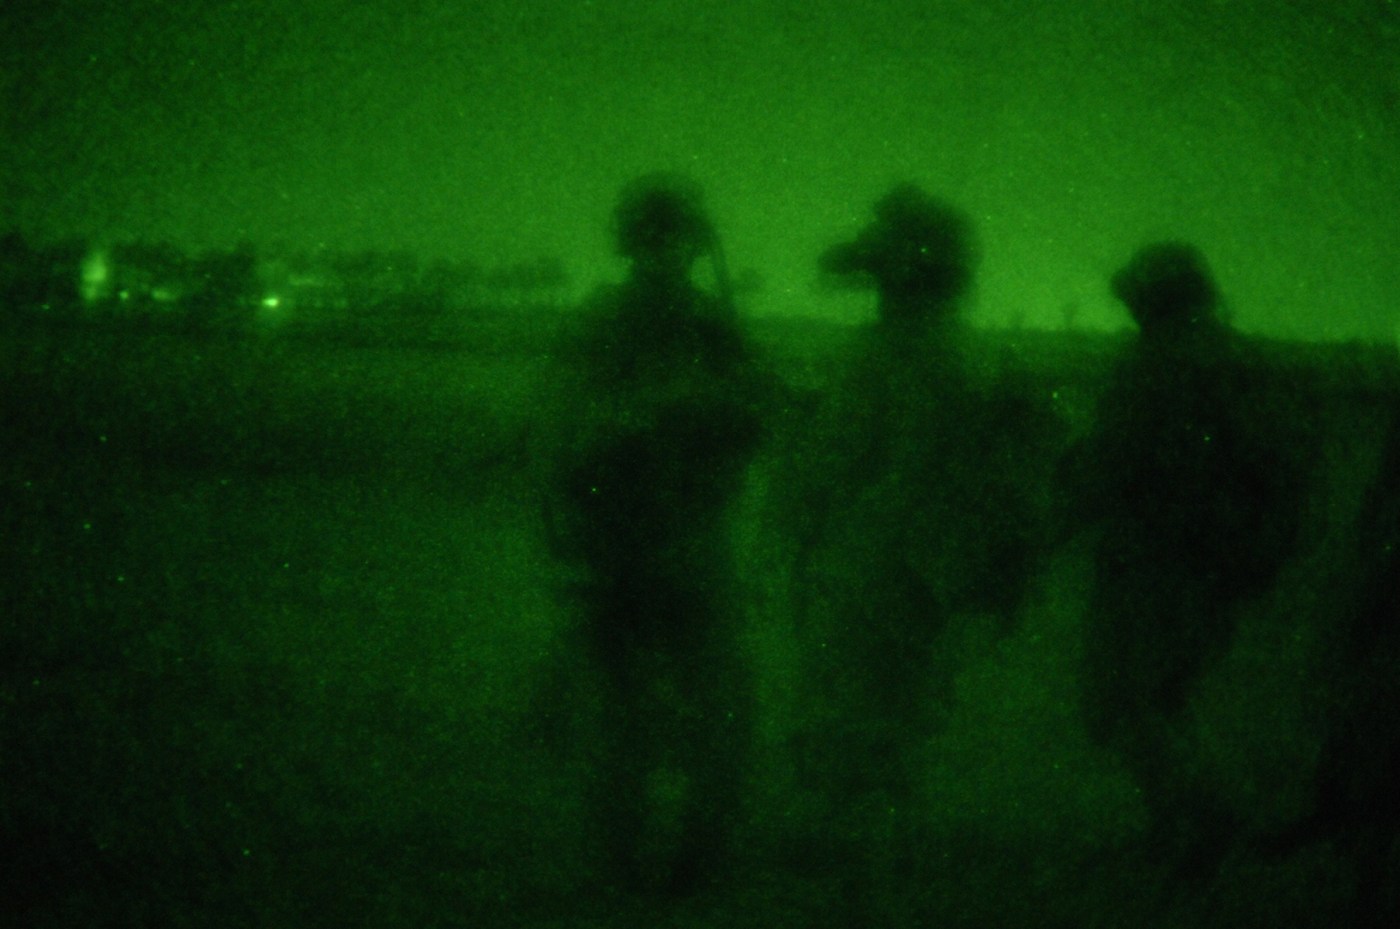 Night vision photo of three Army soldiers' silhouettes